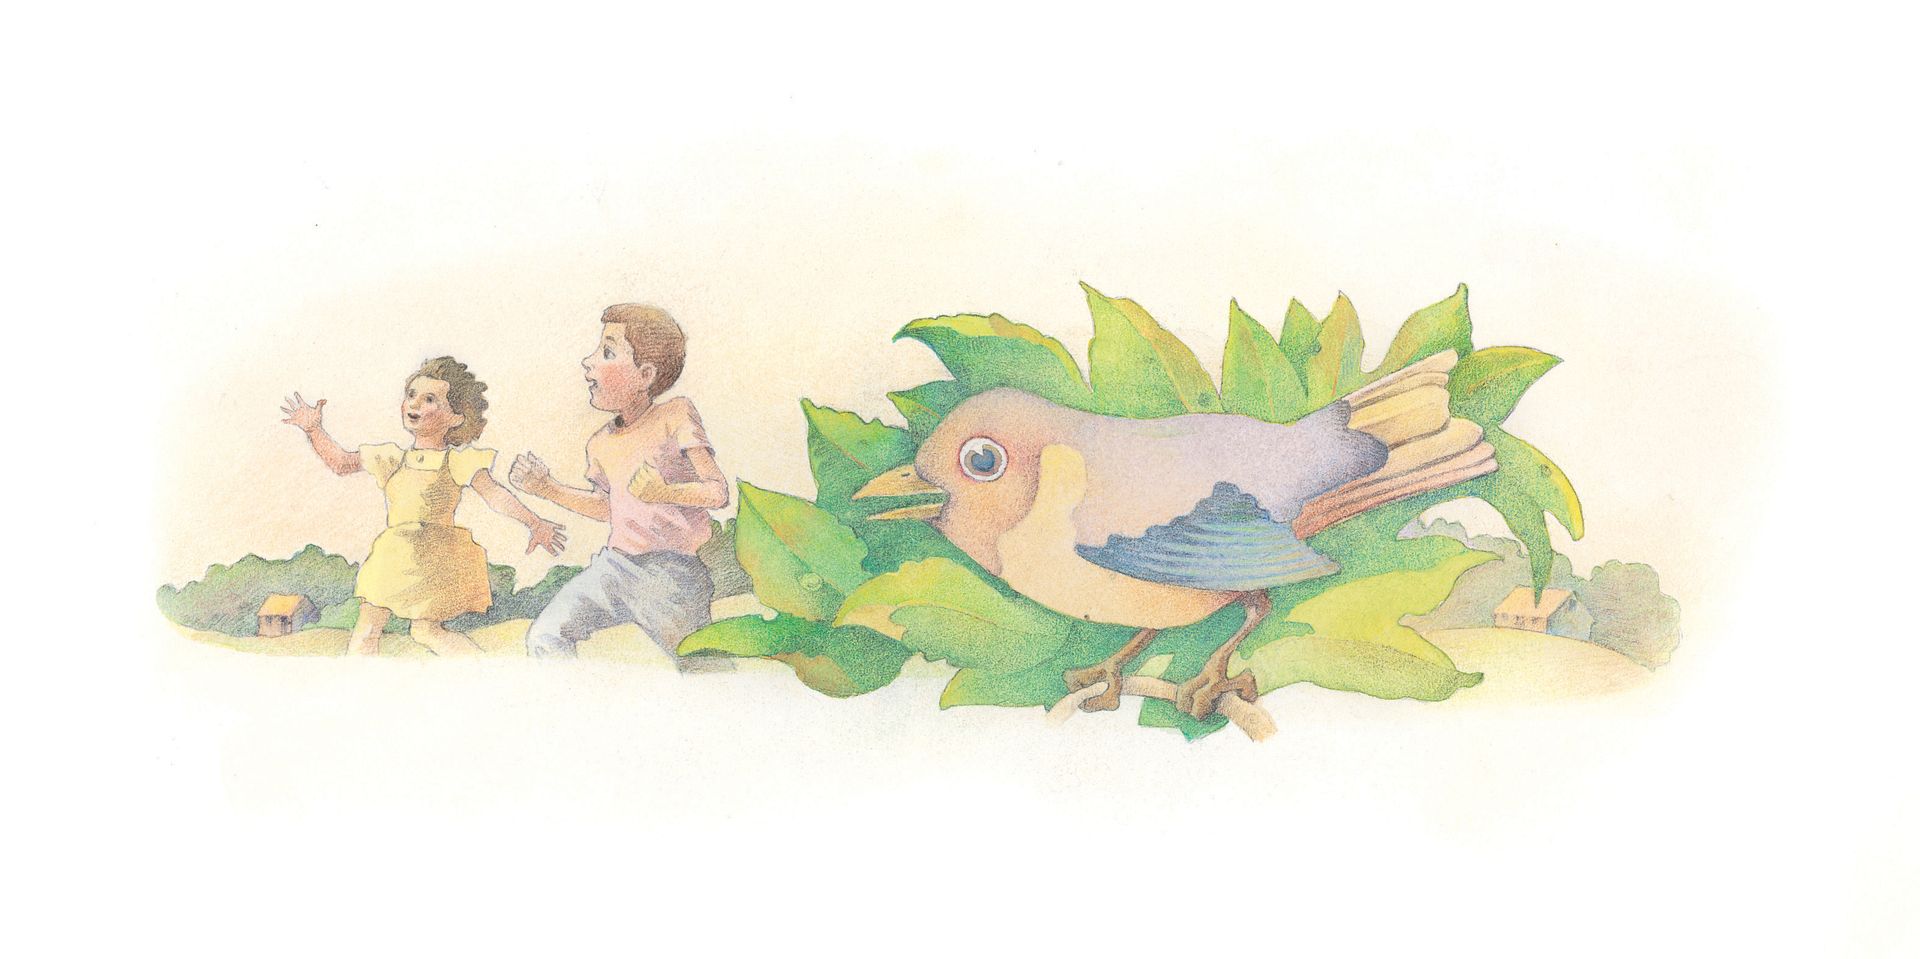 A bird on a branch and two children running in the background. From the Children’s Songbook, page 265, “Be Happy!”; watercolor illustration by Richard Hull.